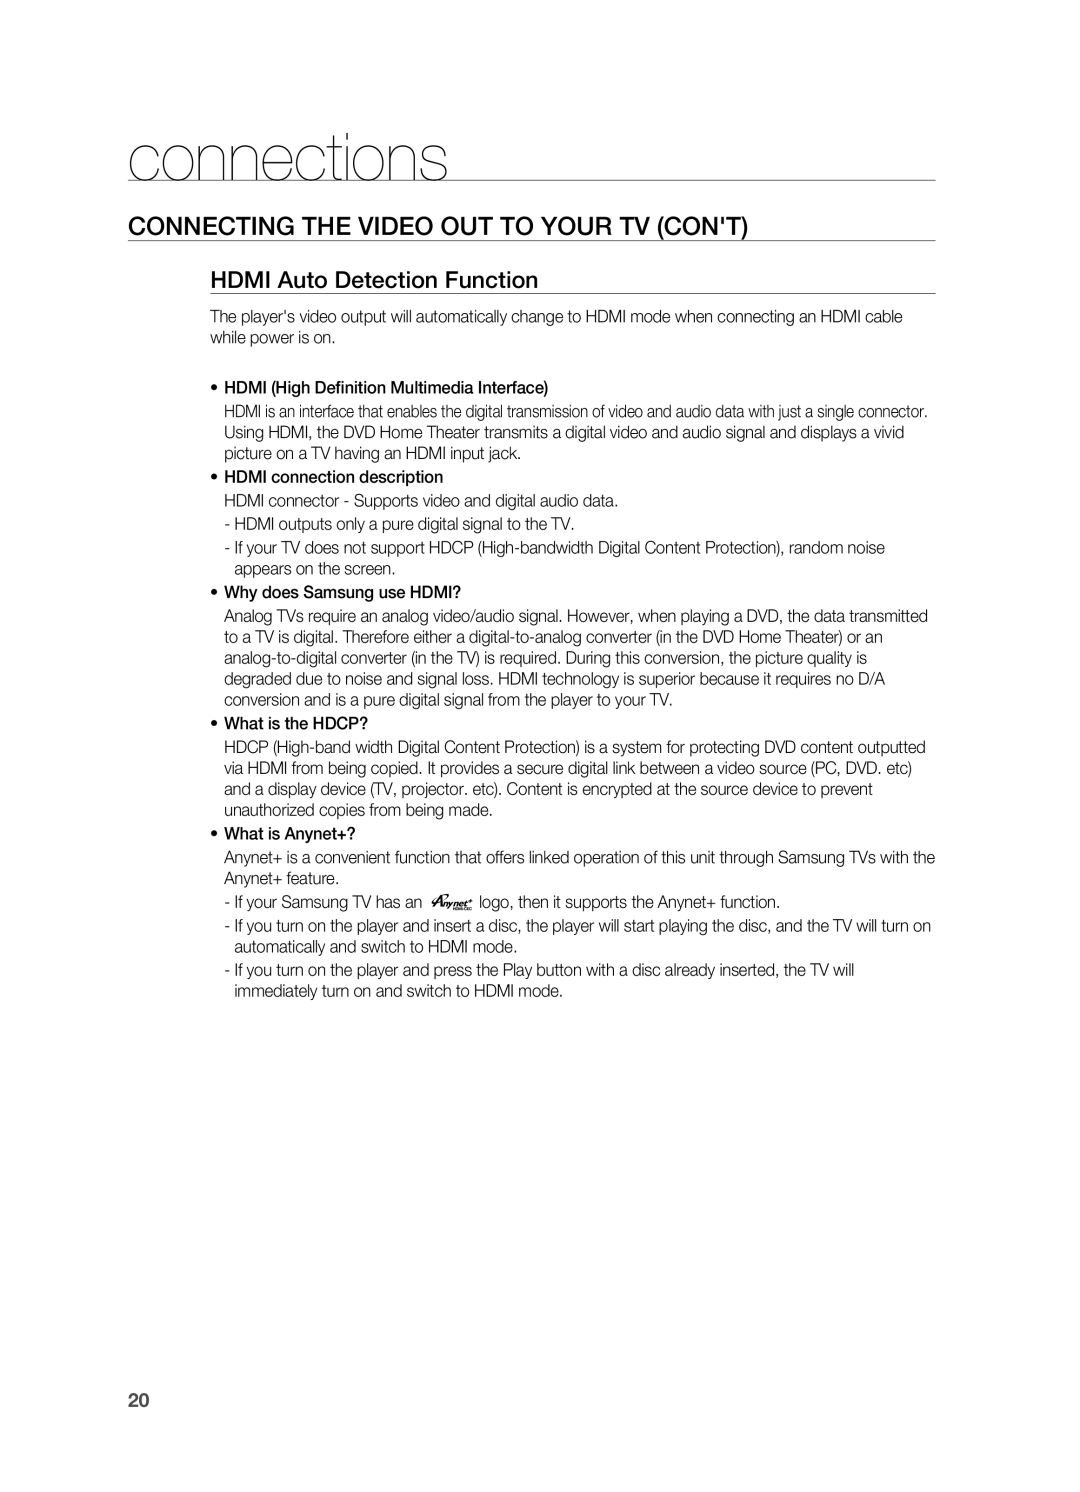 Samsung HT-X810 user manual Connecting the Video Out to your TV cont, HDMI Auto Detection Function, connections 